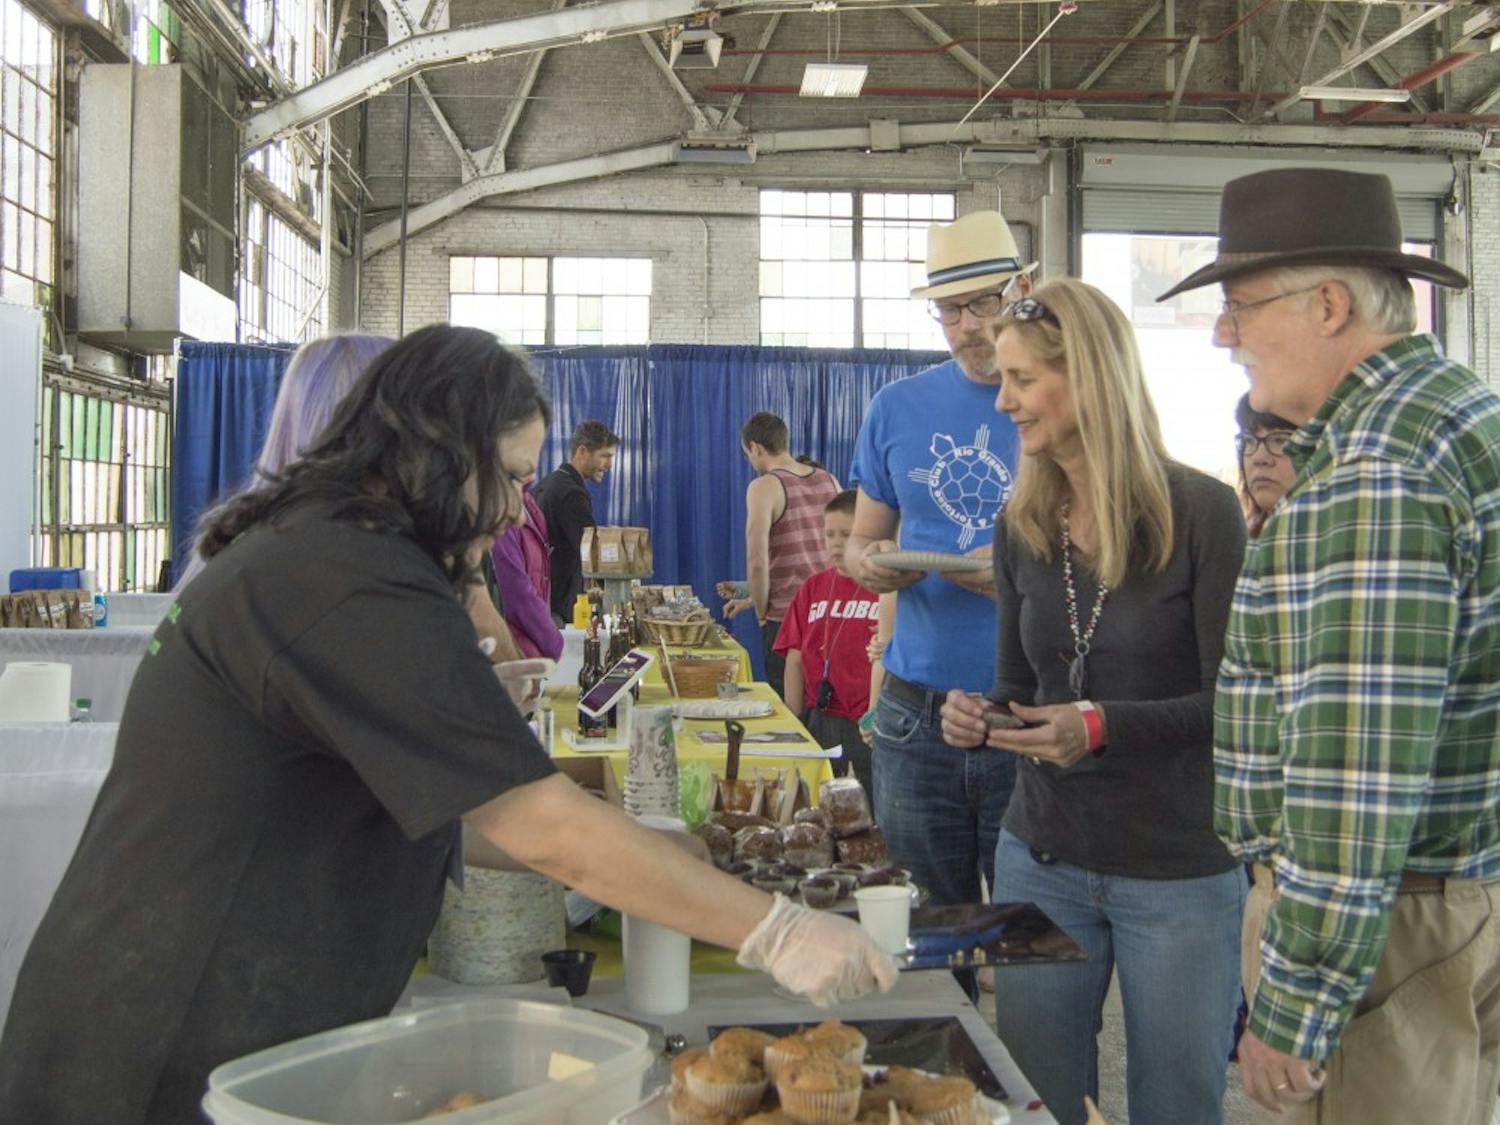 Annapurna employes give out samples of their gluten-free vegetarian muffins at the Naked Food Festival on Saturday. The fair was a market where people brought locally grown, organic food for sampling and purchase.  